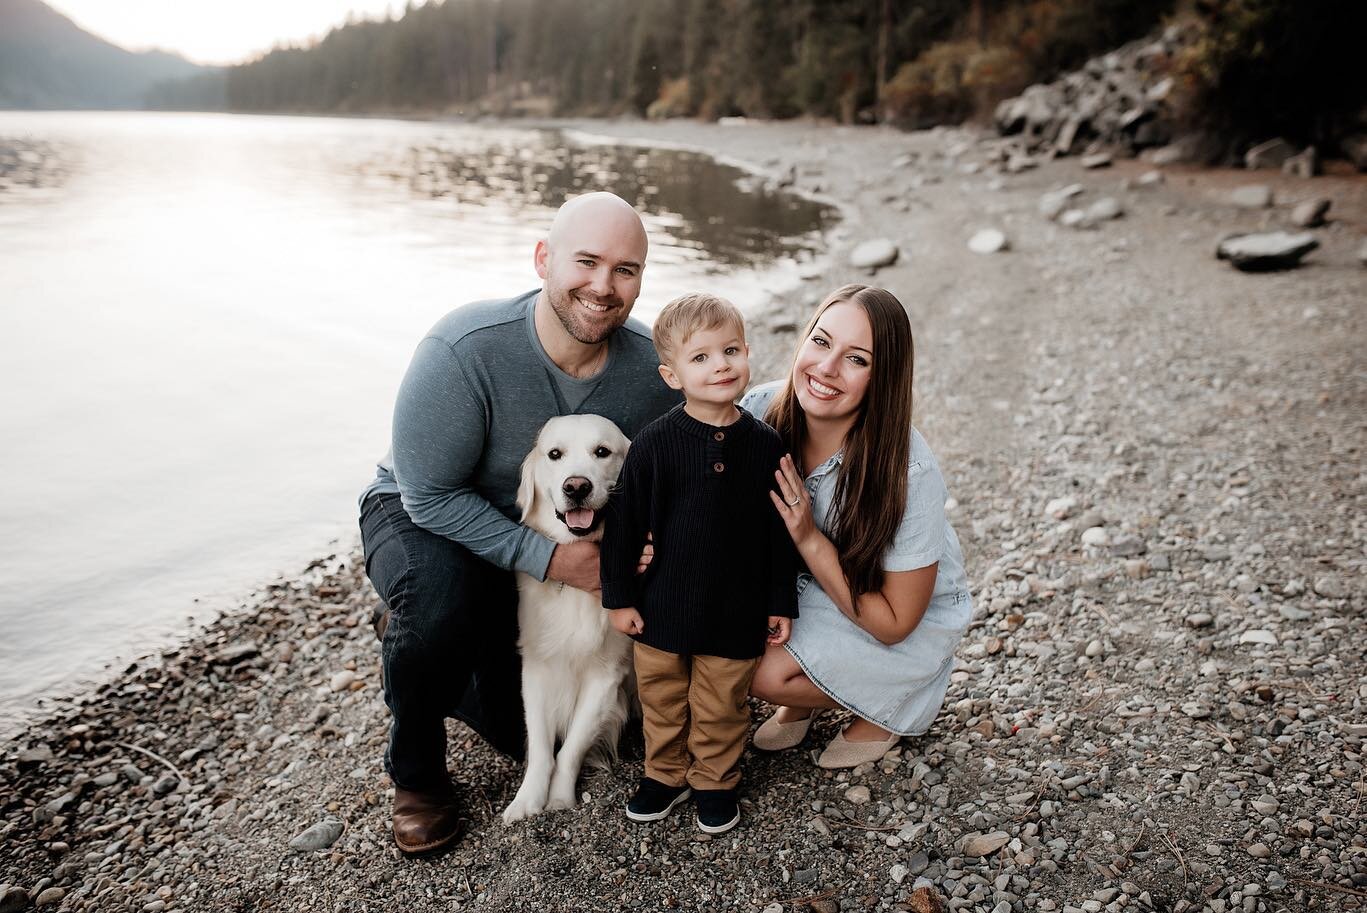 Fall family sessions are forever going to be my jam. I had the most adorable family in front of my lens tonight as we tried to soak it one of the last gorgeous fall nights before our weather takes a drastic shift this week. Idaho friends- who would b